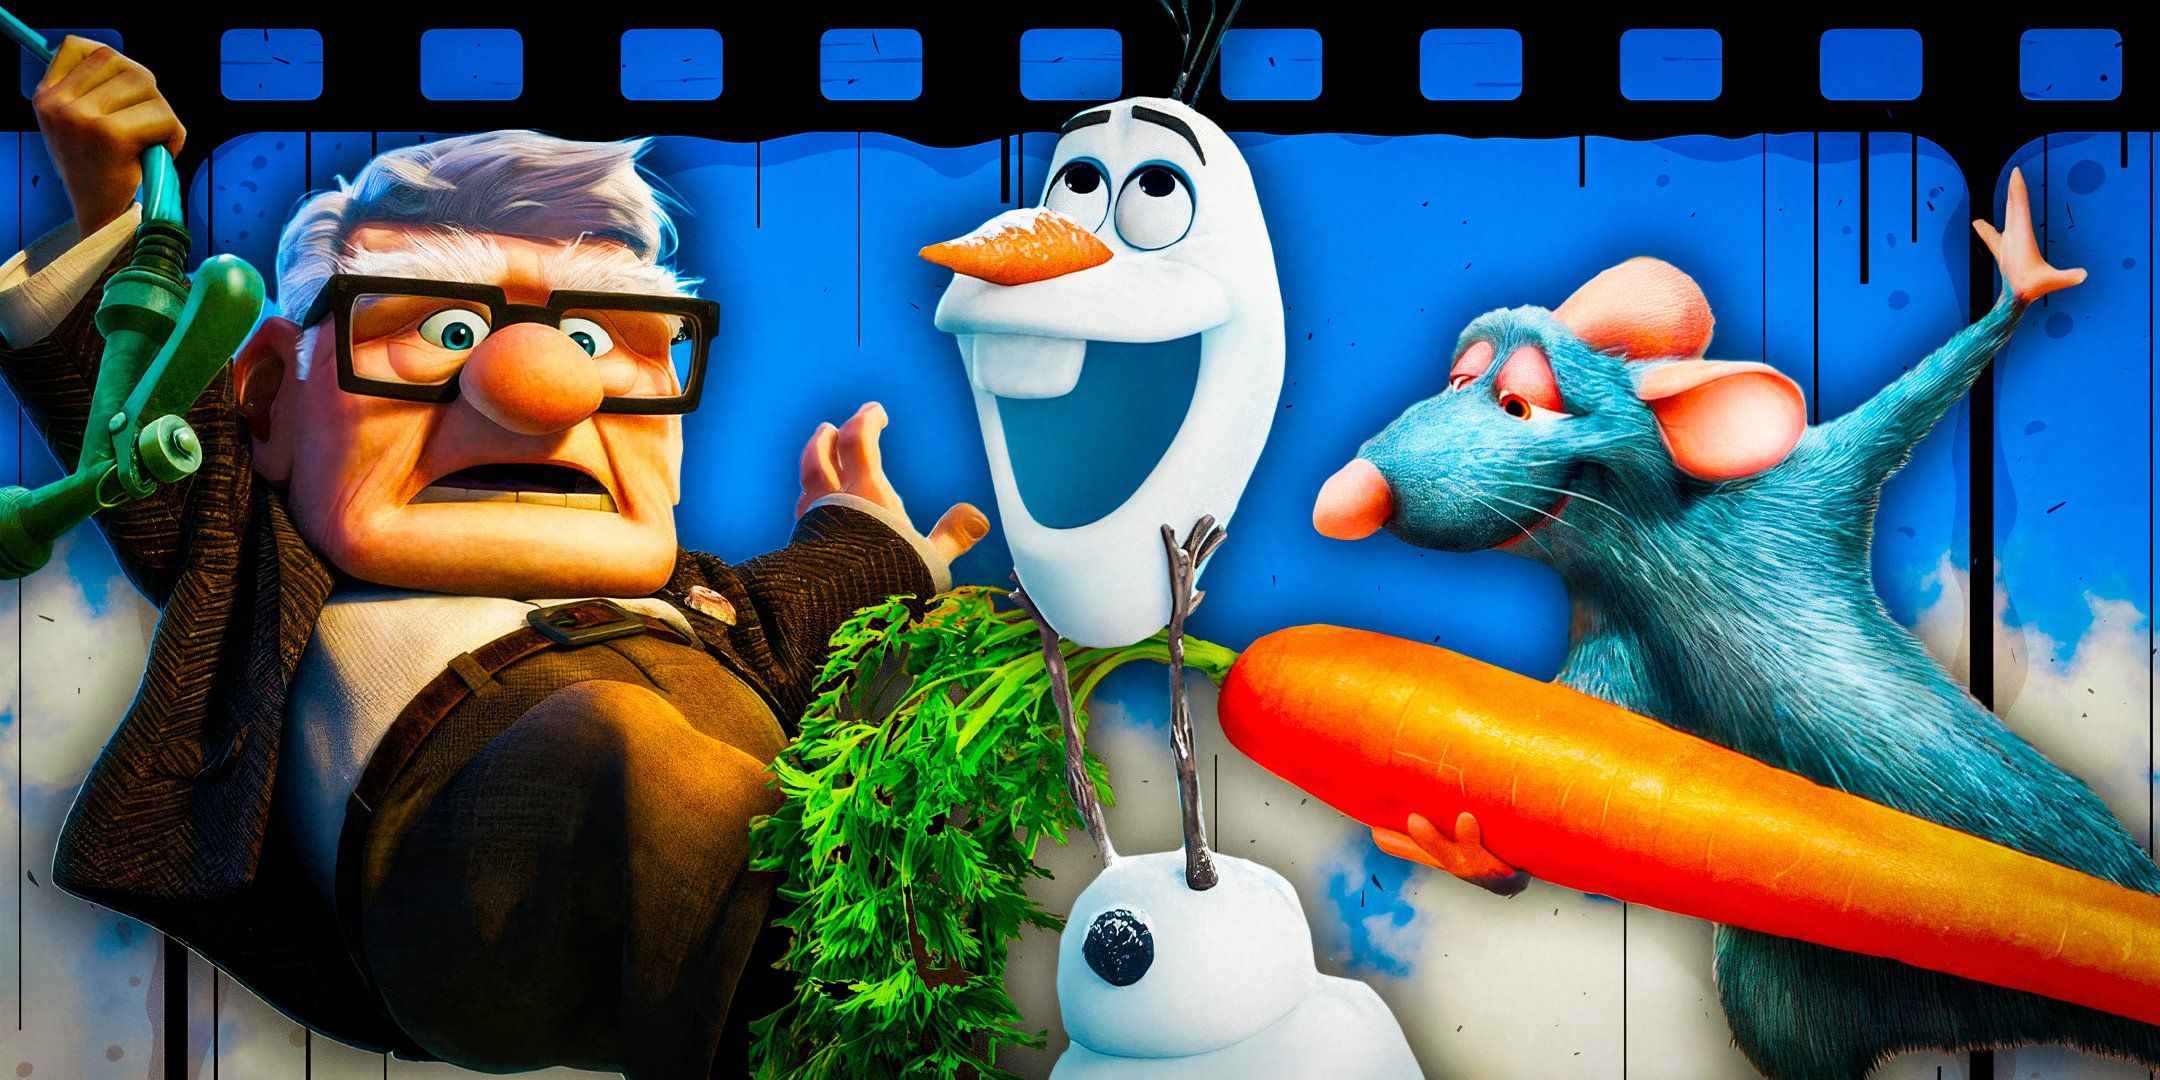 Custom image of Carl (Up), Olaf (Frozen), and Remy (Ratatouille) on top of a film reel.